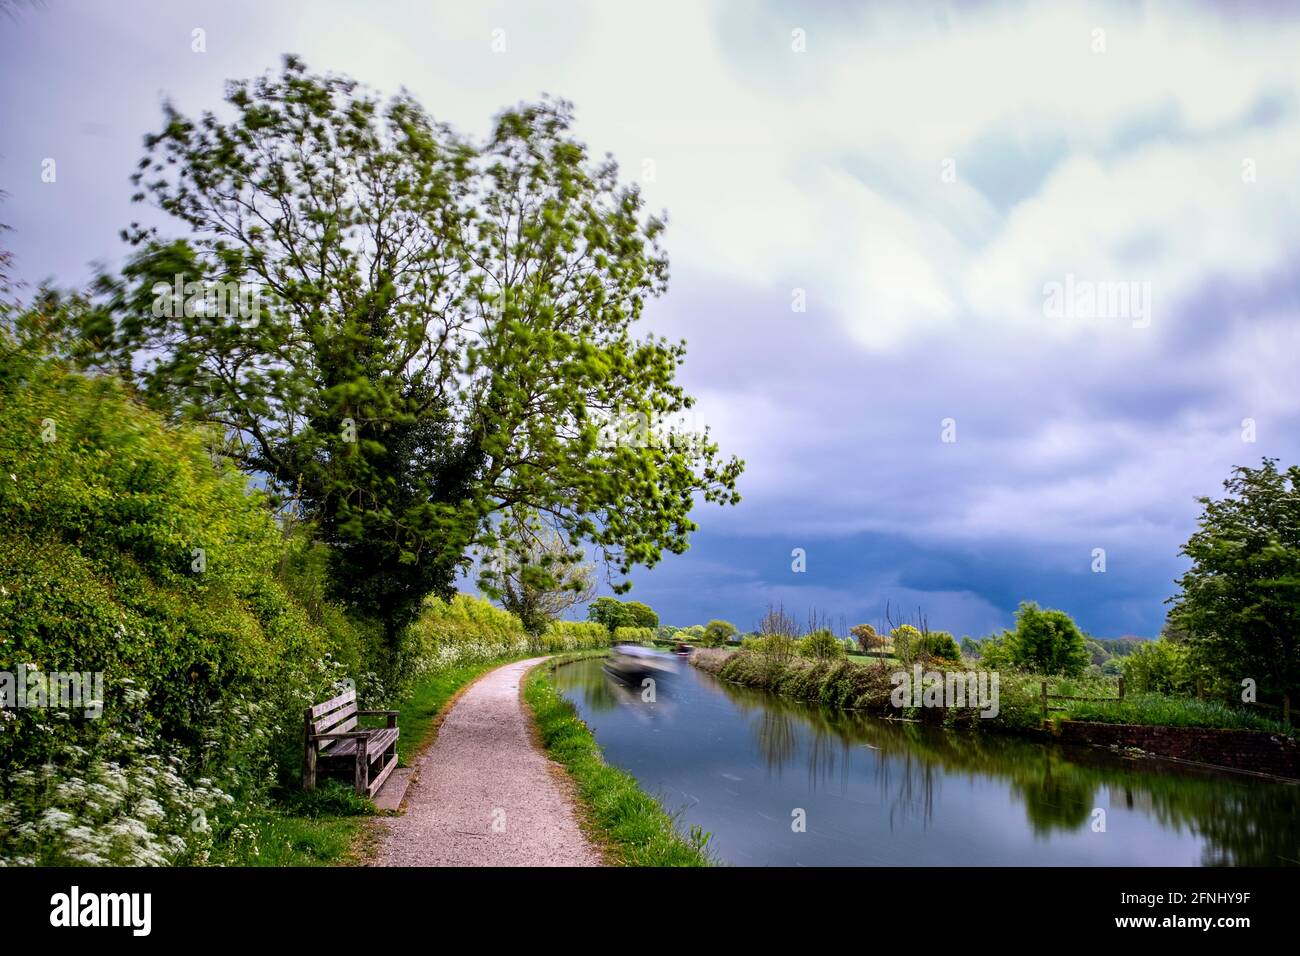 Panchina sul canale Shropshire Union a Middlewich Cheshire UK Foto Stock